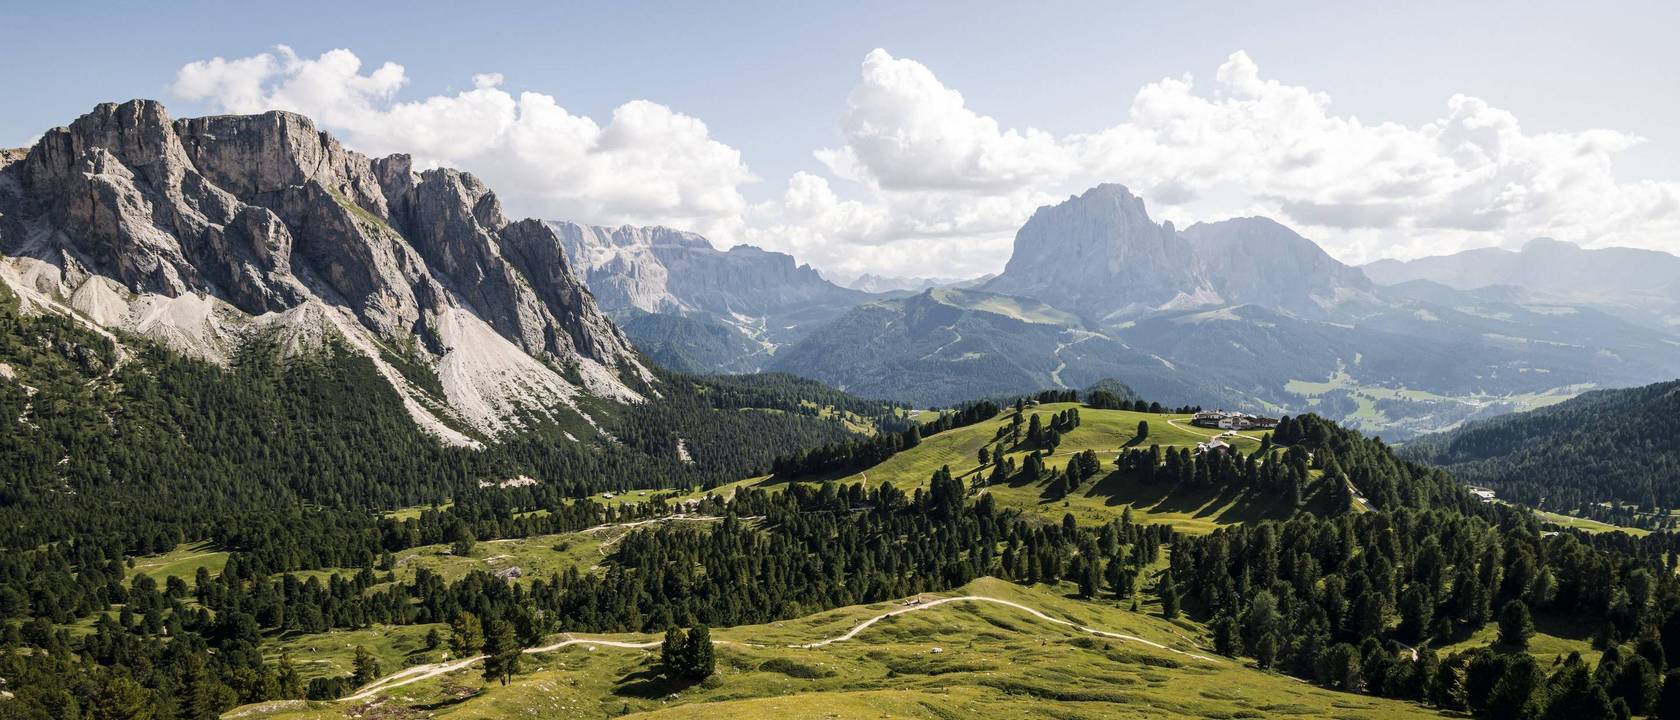 Family hotels in the Dolomites: Holidays in the realm of the Pale Mountains